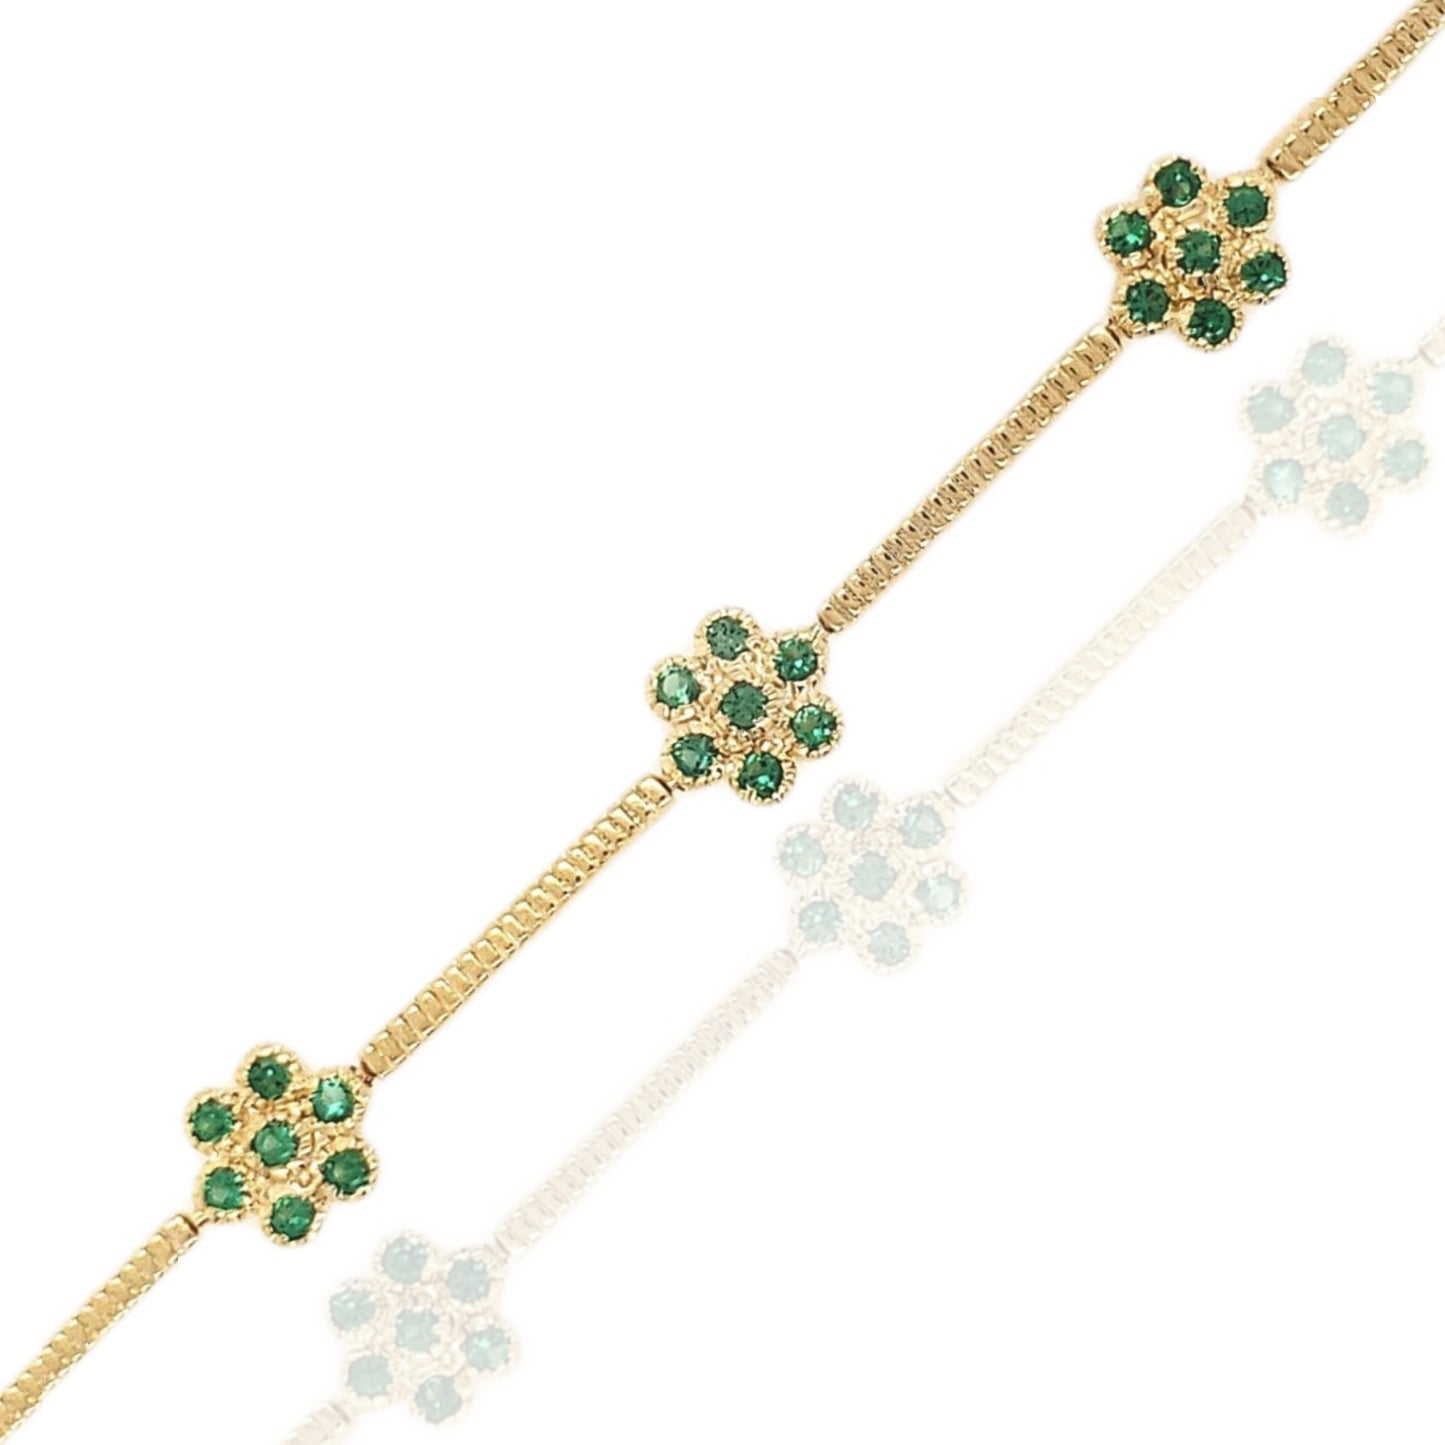 Sterling Silver Gold Plated Colored Stone CZ Flower Bracelet - HK Jewels